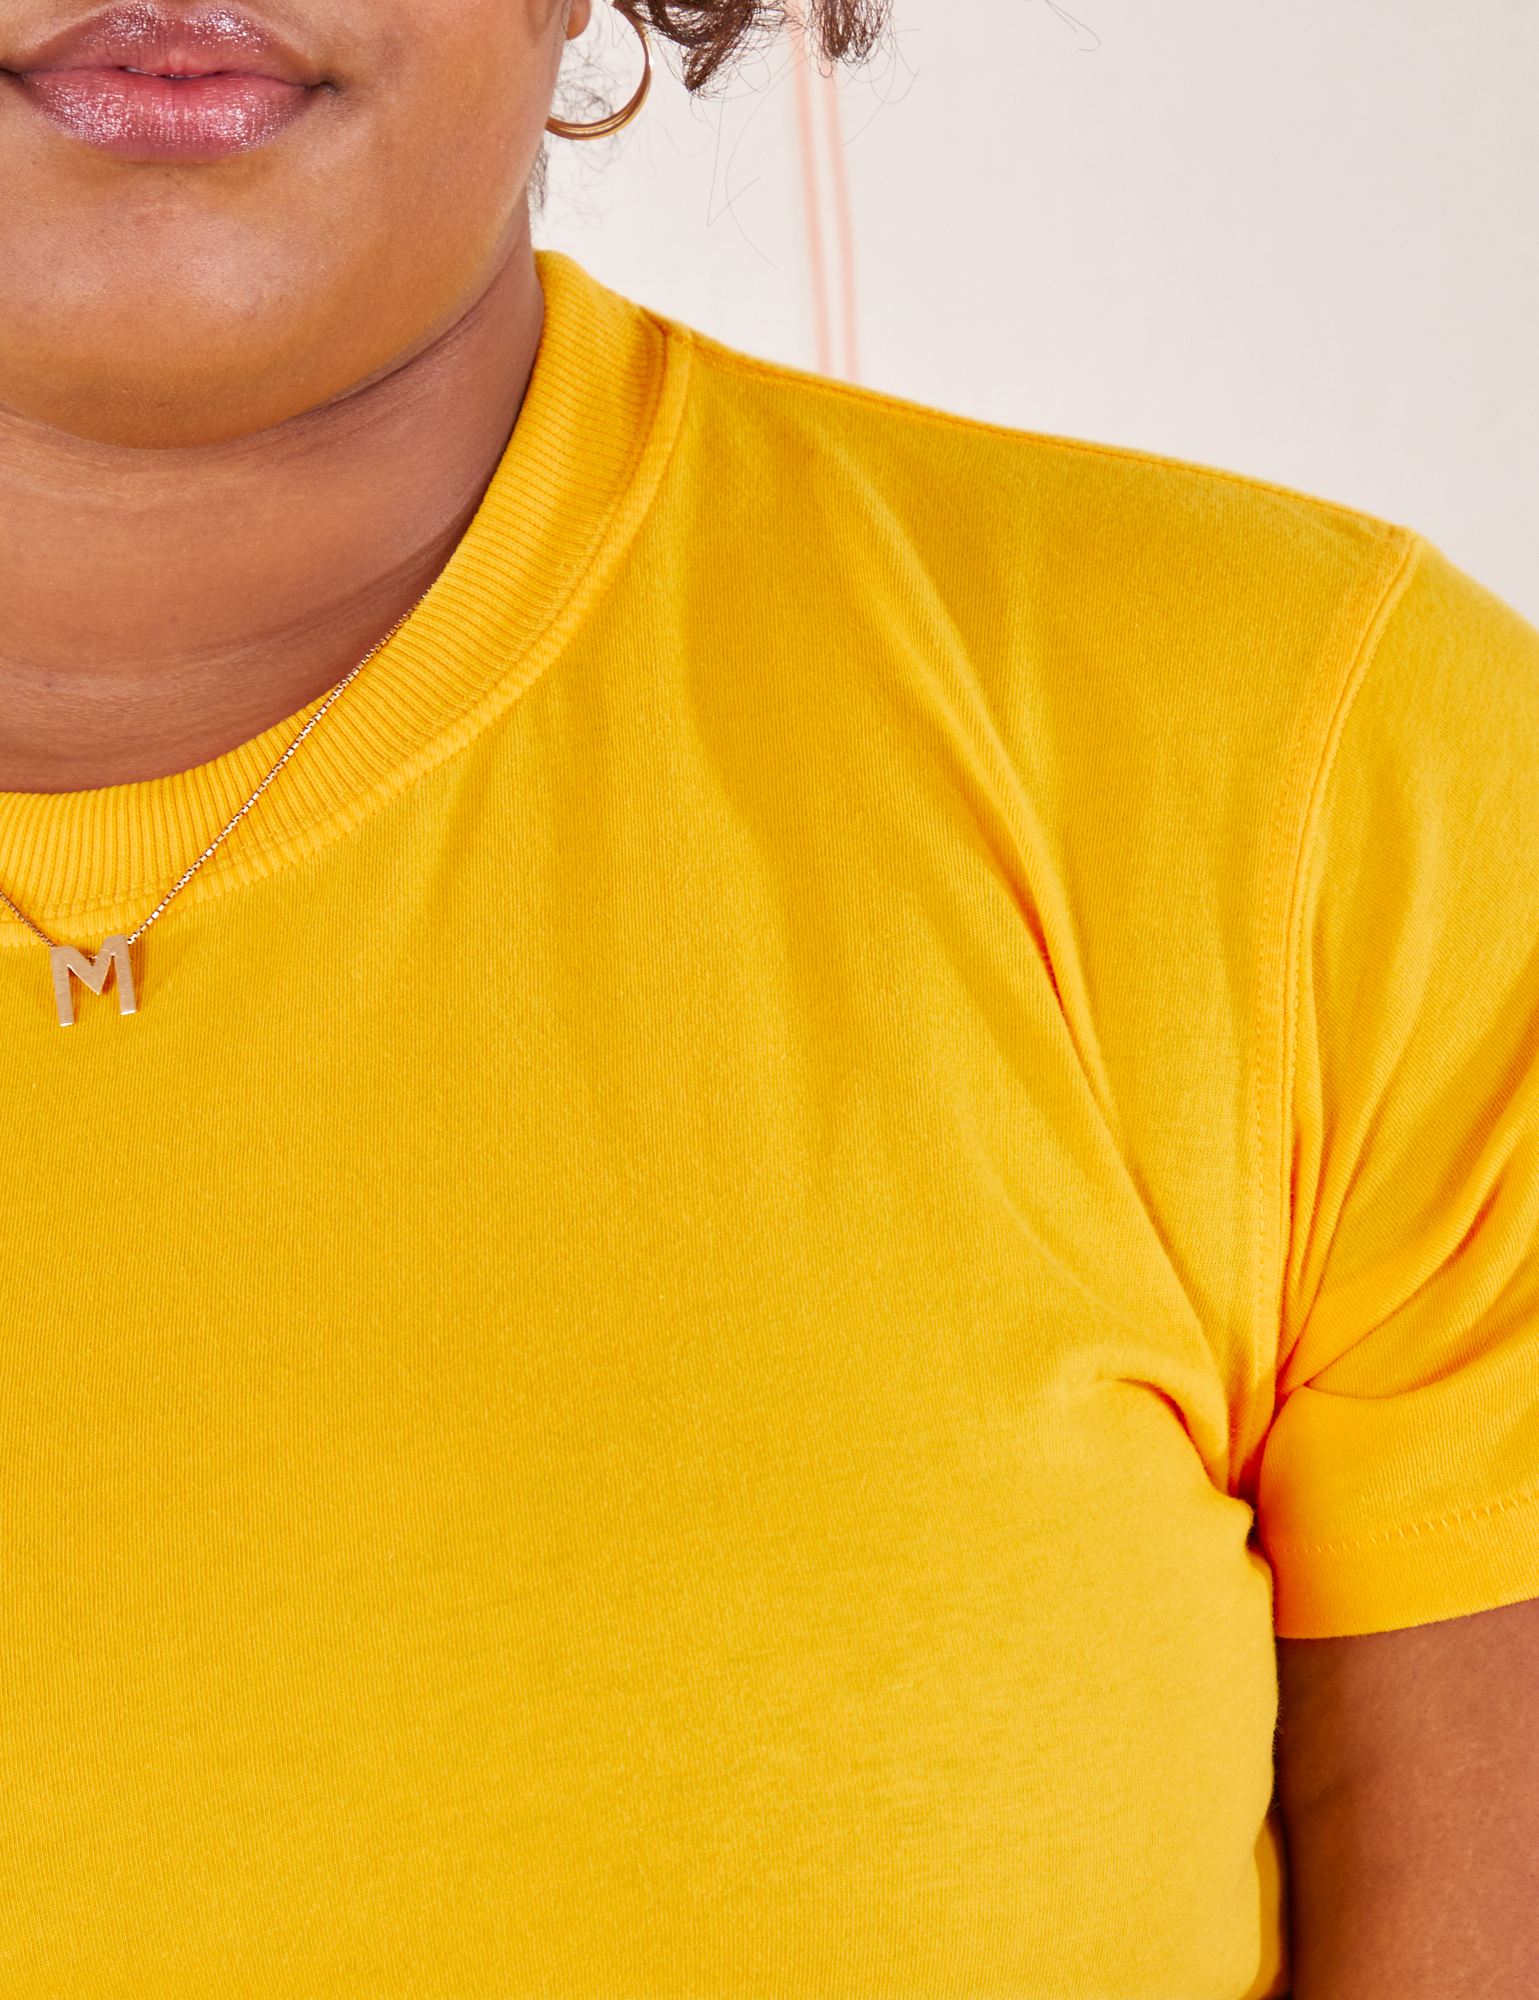 The Organic Vintage Tee in Sunshine Yellow front close up on Morgan